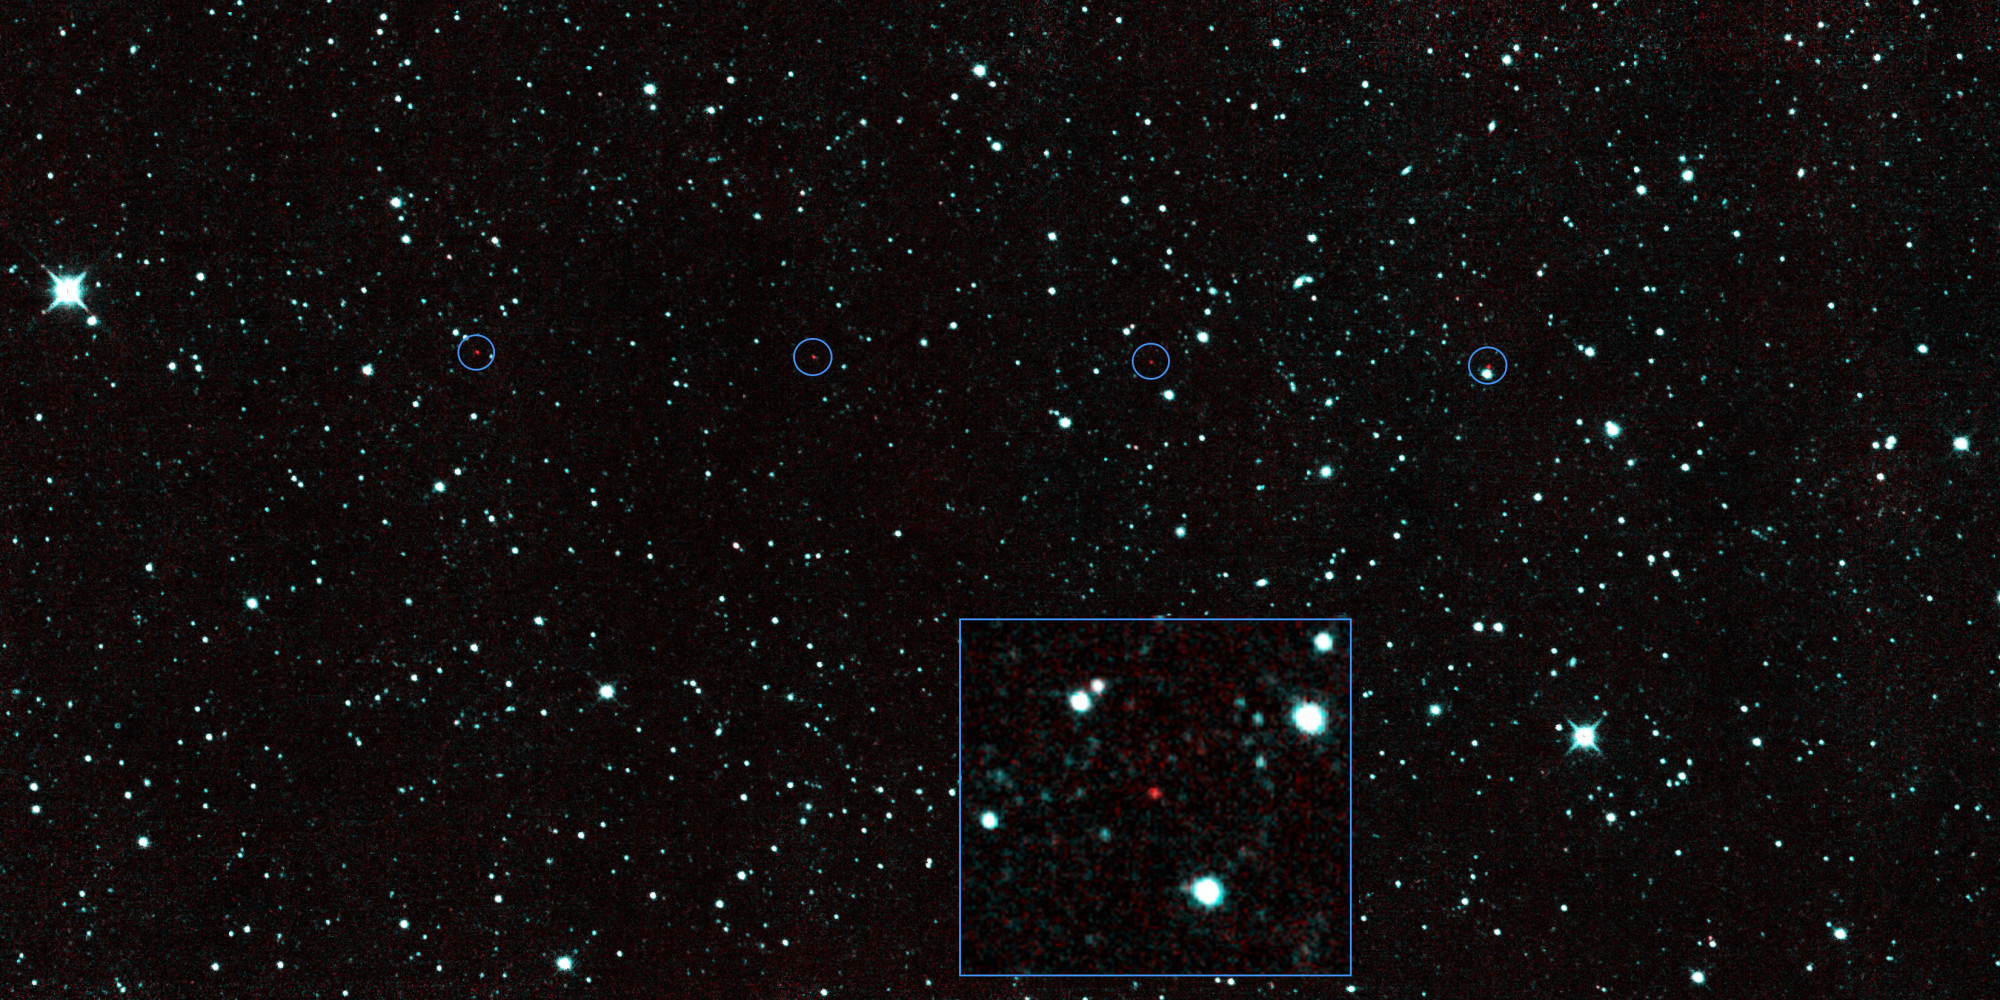 Potentially Dangerous Asteroid Spied By NASA NEOWISE Space Telescope | HuffPost